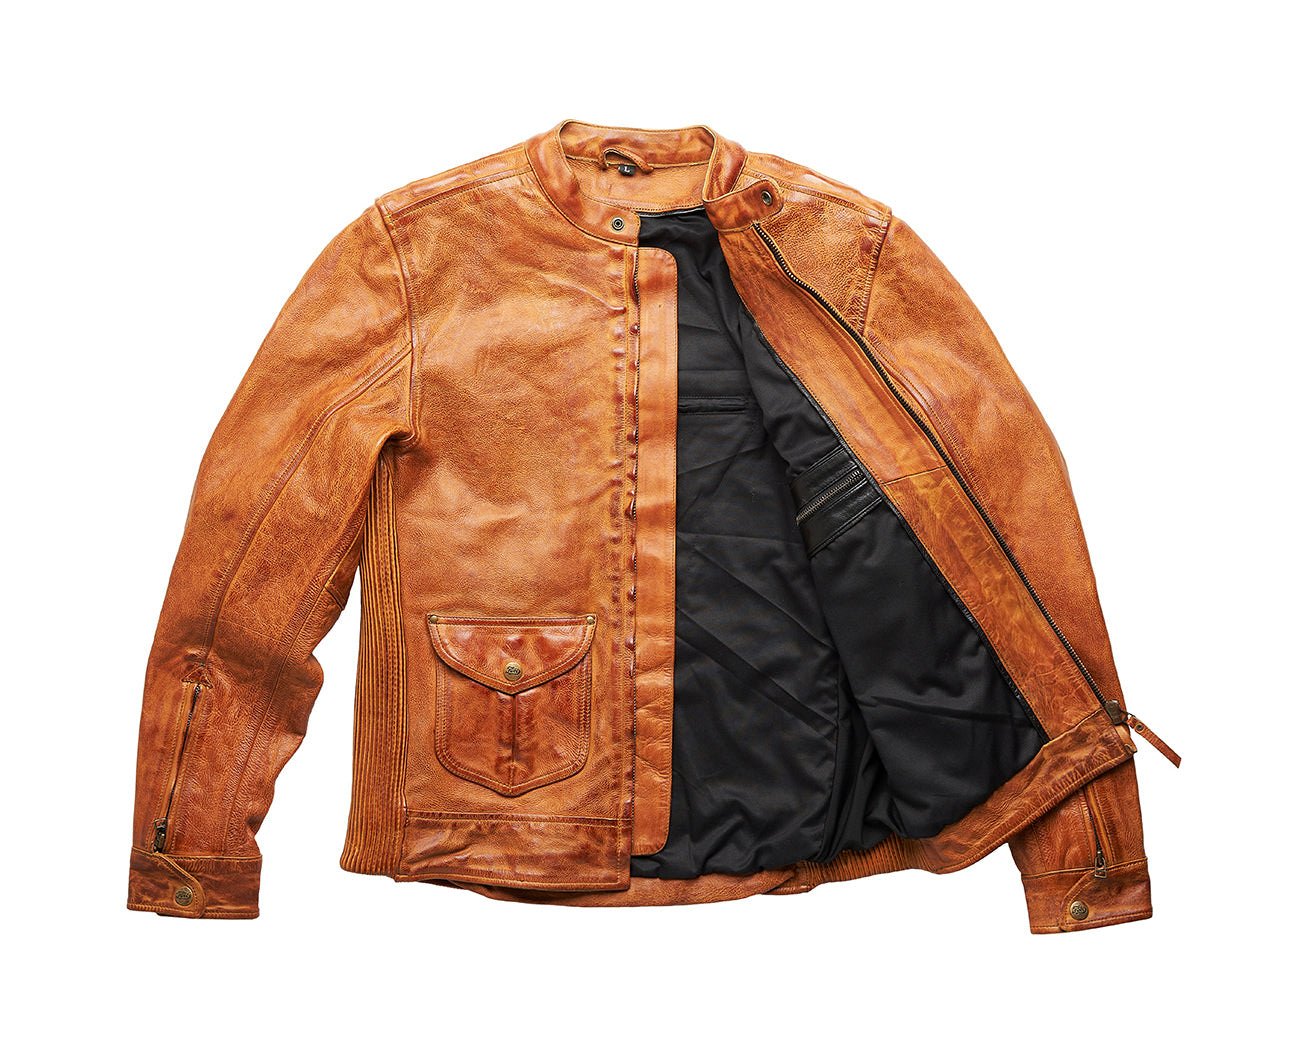 Bourbon Jacket By Fuel Motorcycles 1